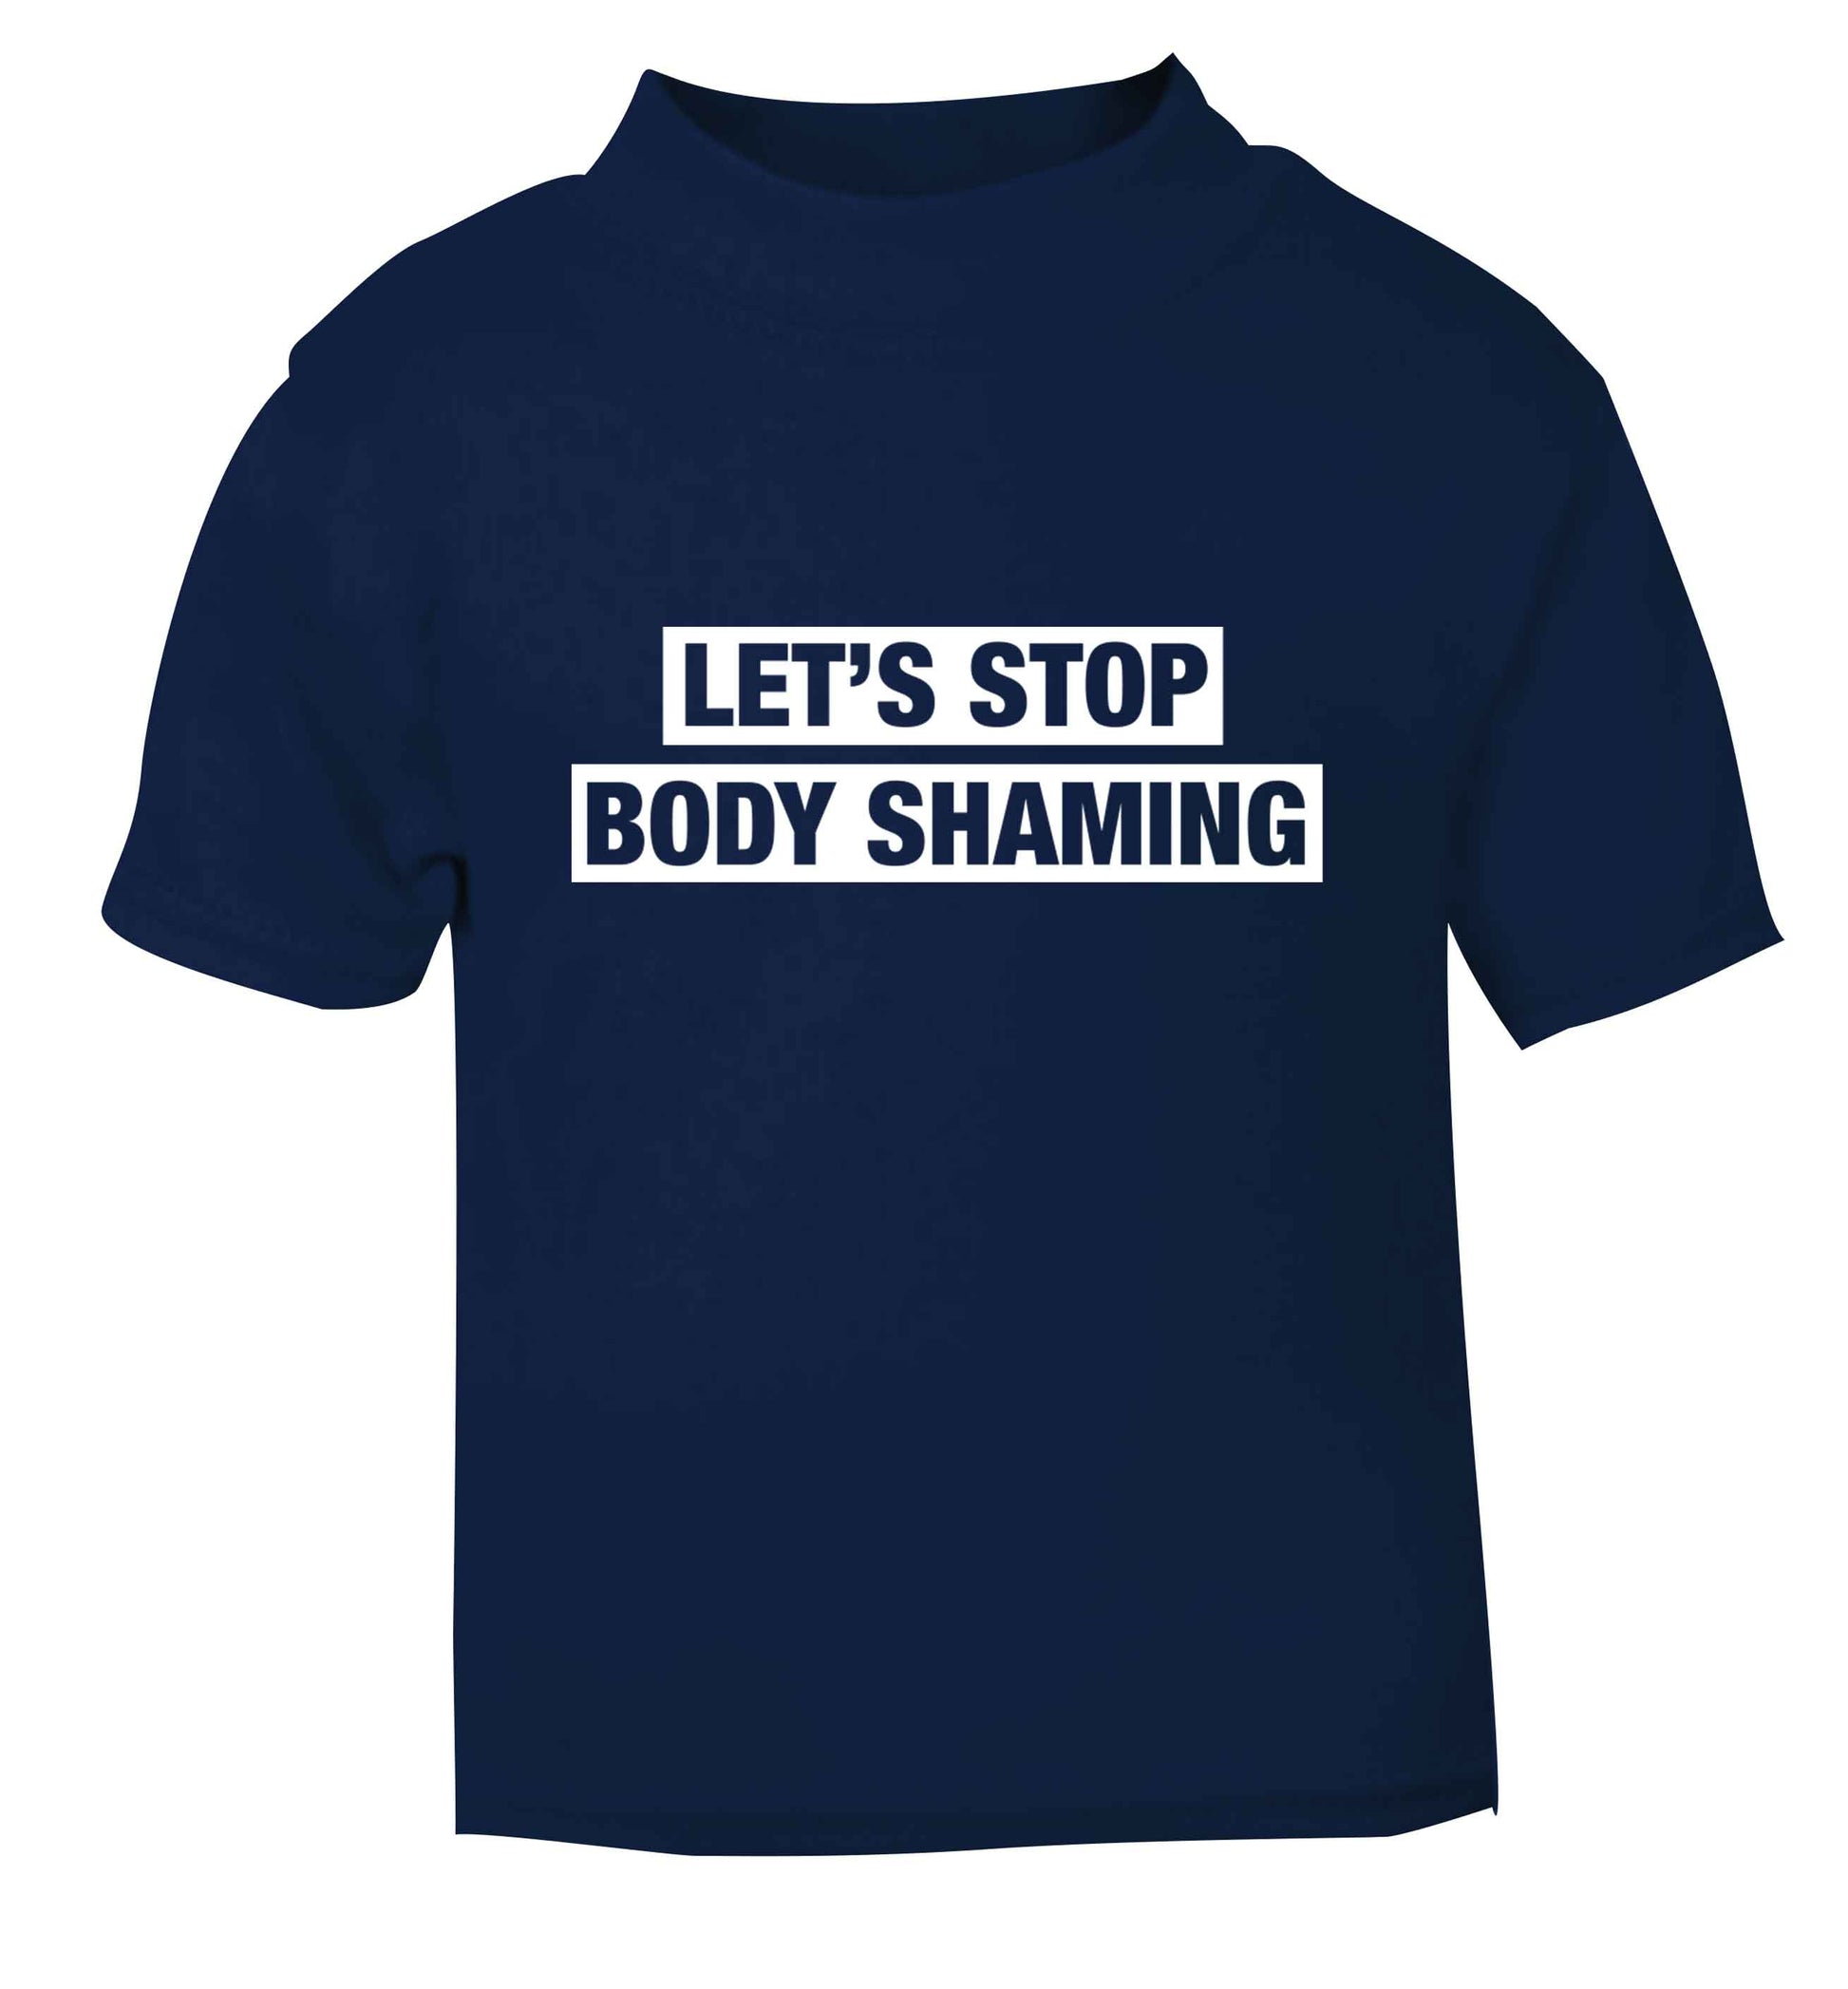 Let's stop body shaming navy baby toddler Tshirt 2 Years